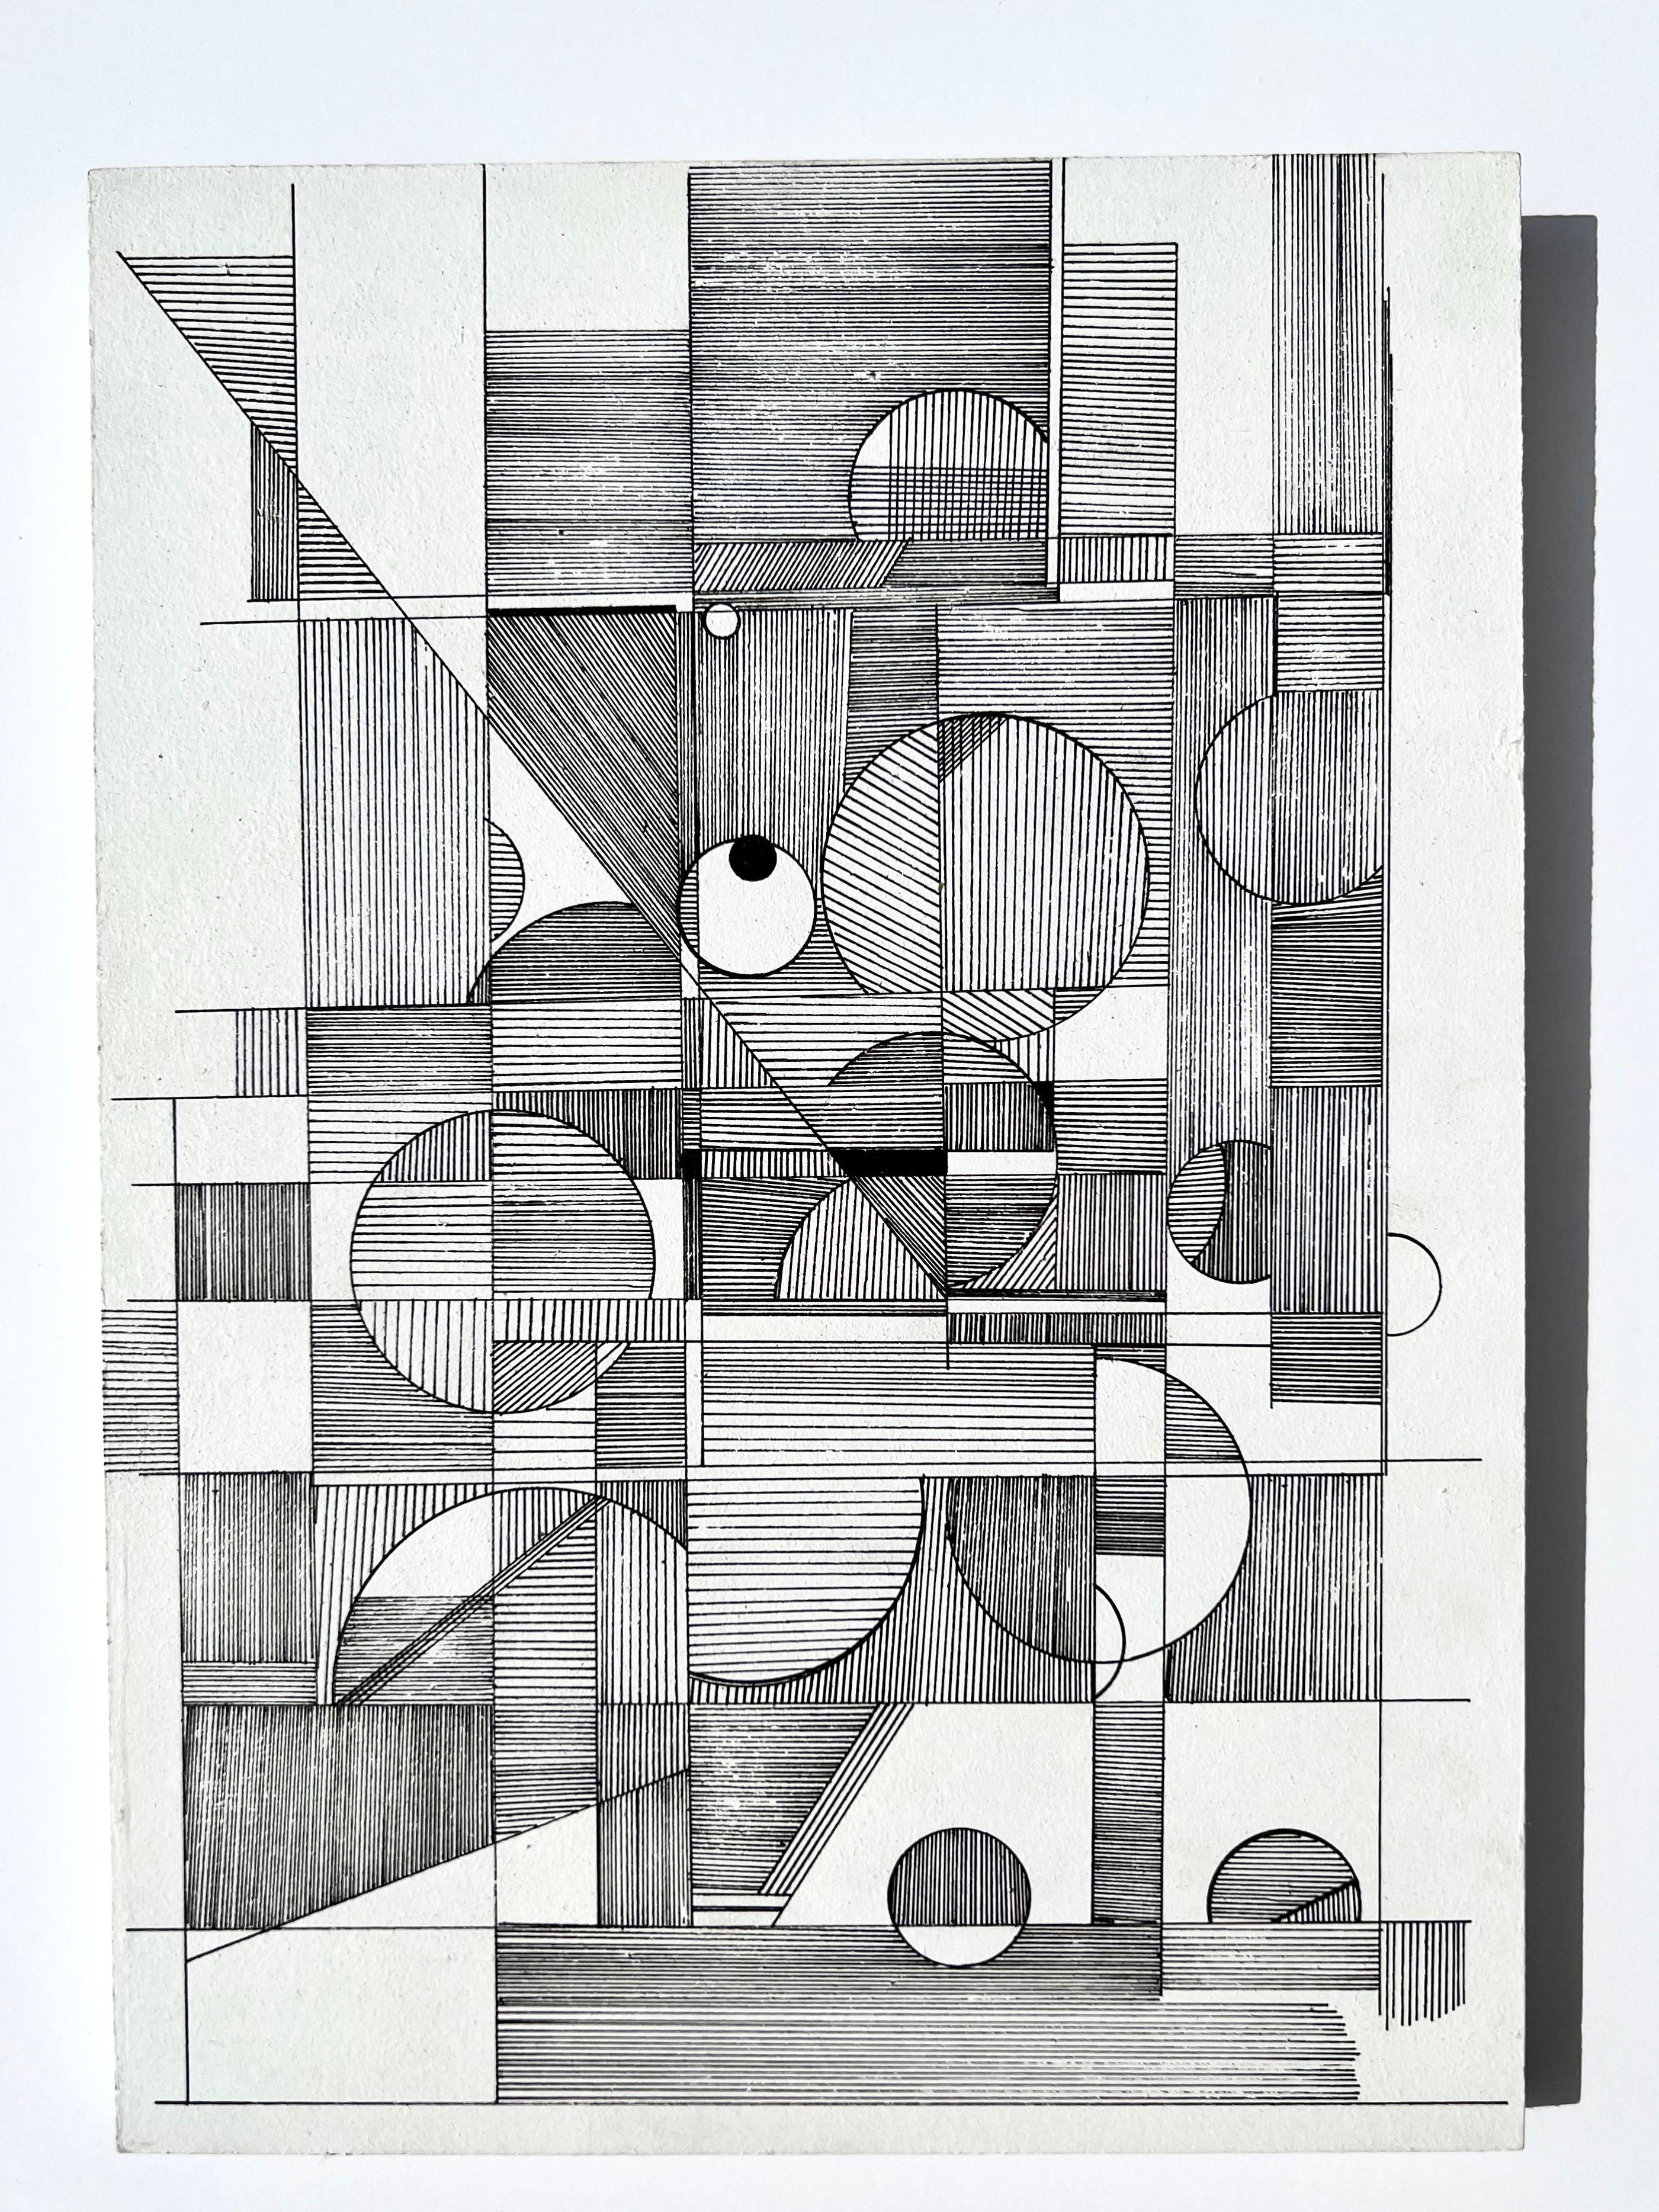 Contemporary Desert Drawing N.001, Original Black and White Archival Ink Drawing on Hardwood For Sale